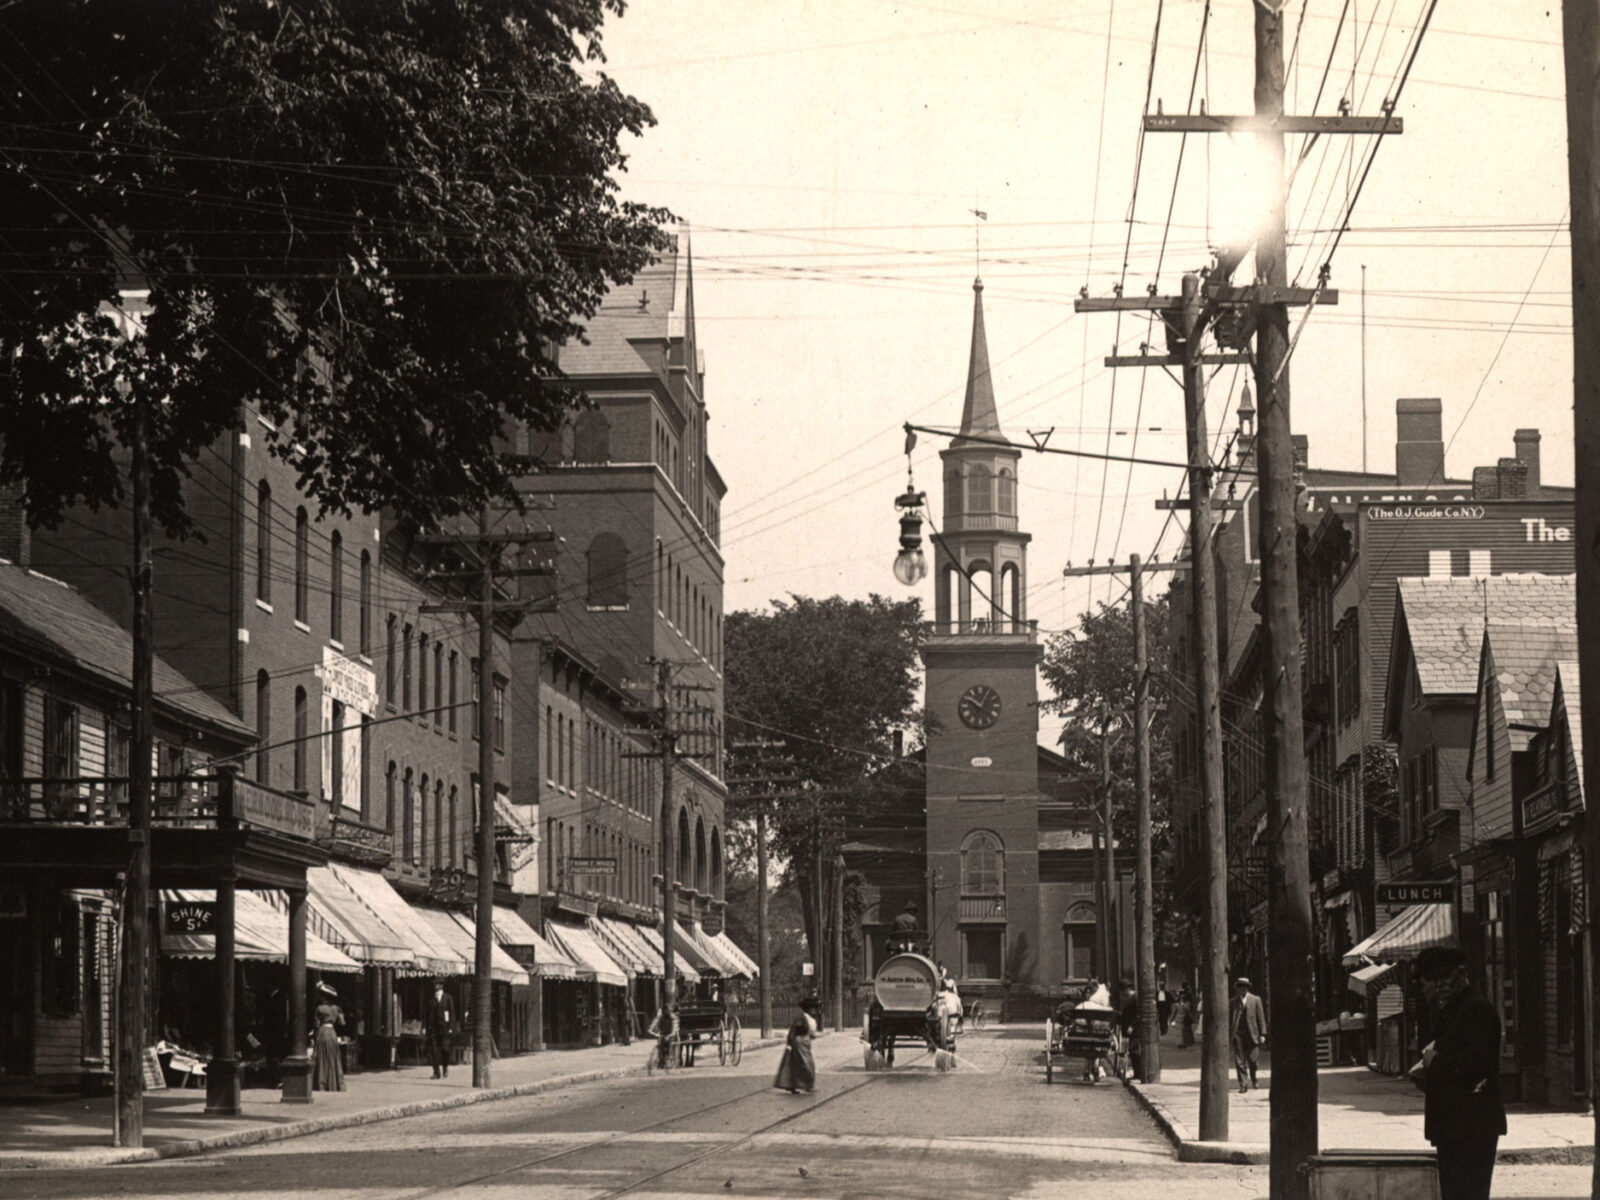 Black and white postcard depicting a view of the upper block of Church Street in Burlington, Vermont, looking north from Cherry Street.